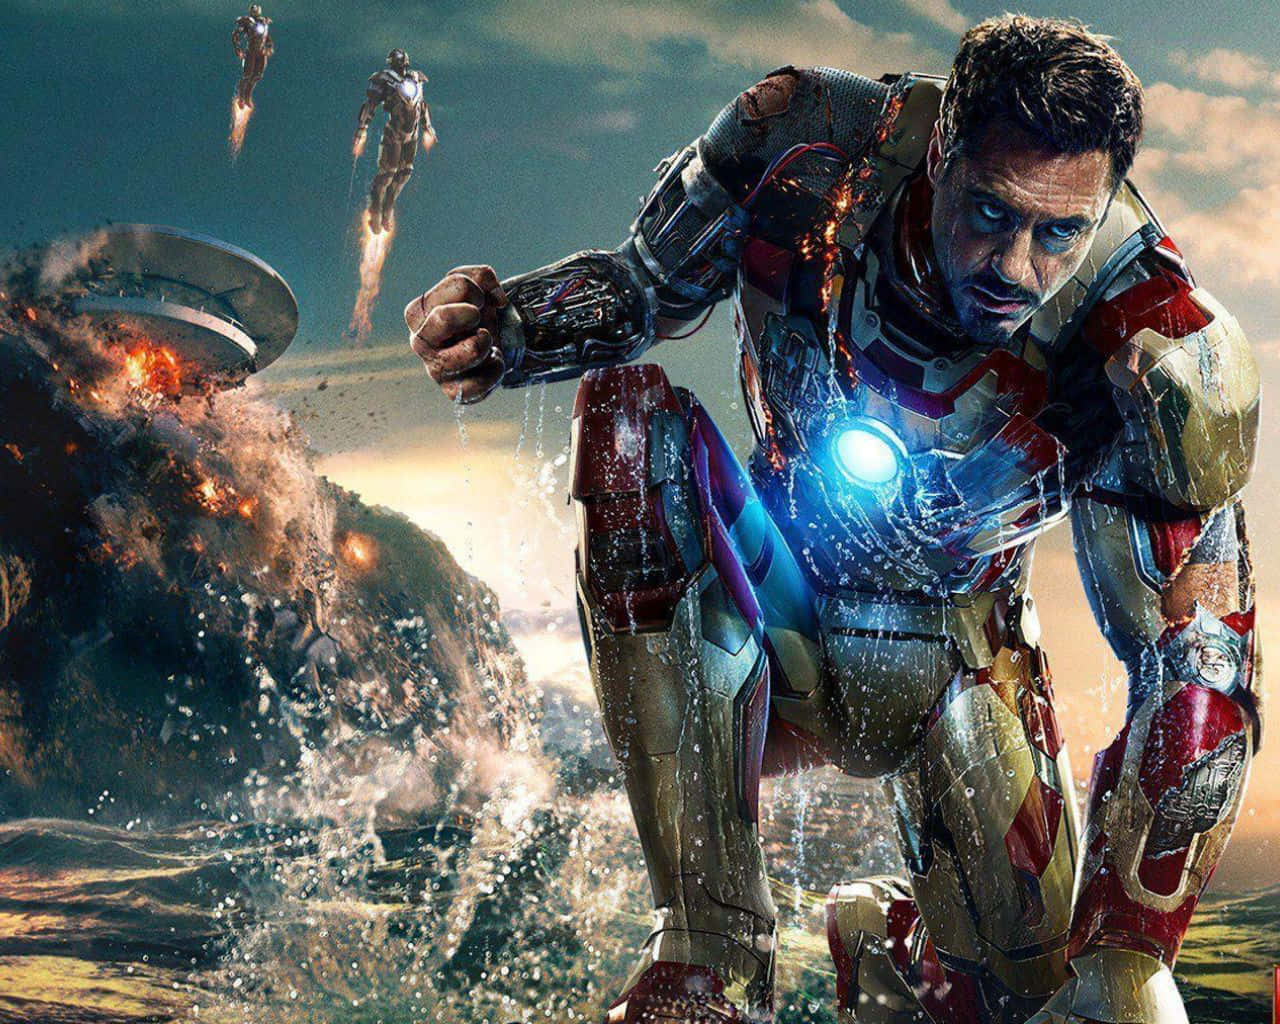 Iron Man faces off against his archrival Iron Monger in an epic battle Wallpaper